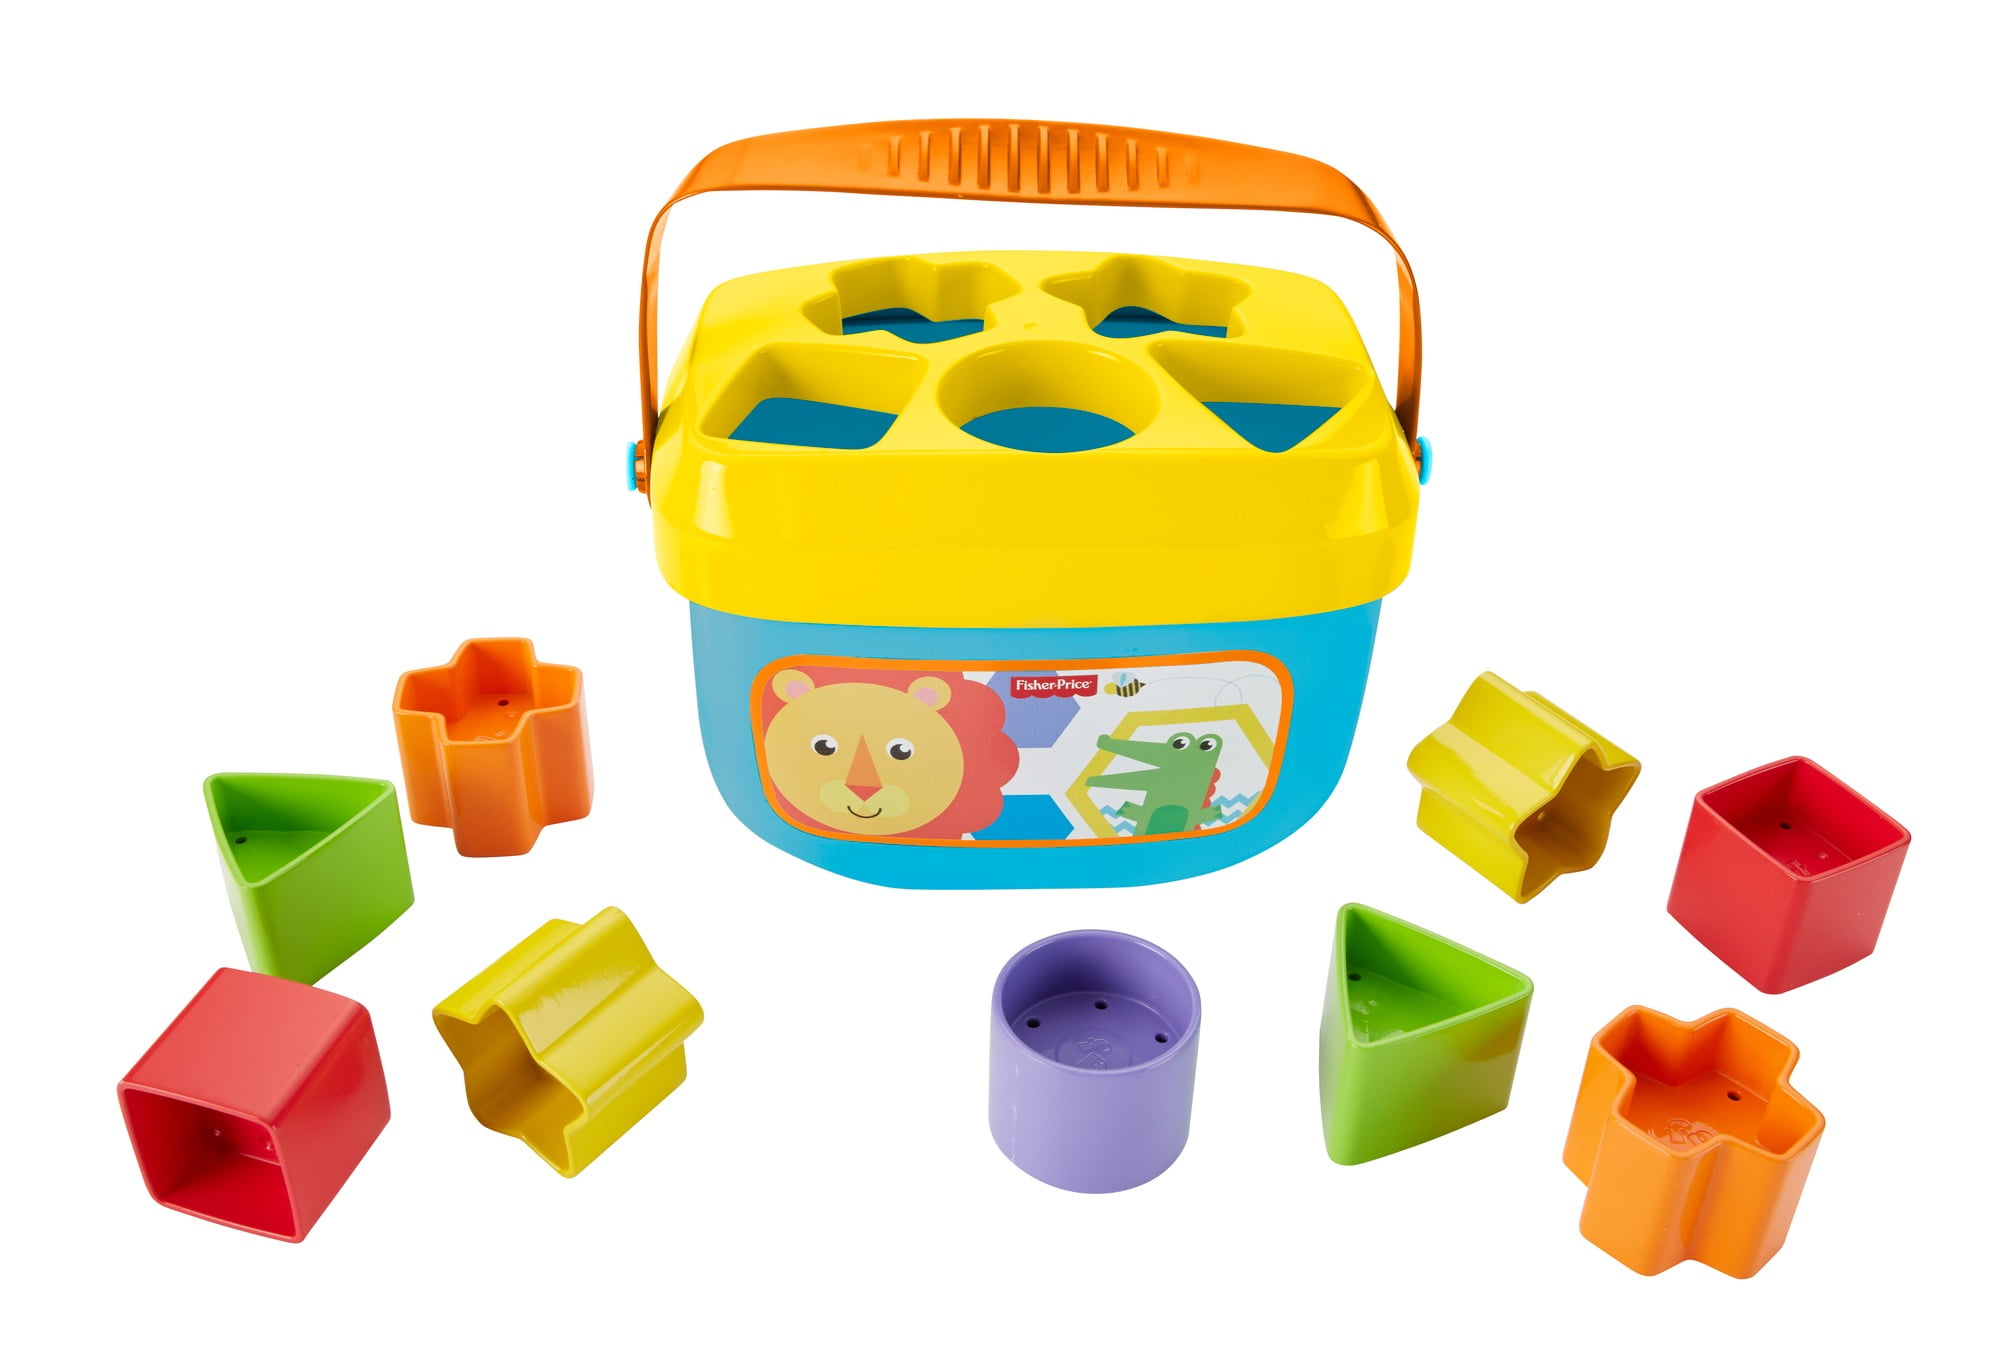 Details about   Fisher-Price Baby's First Blocks Shape Playset Small Kid Multicoloured 